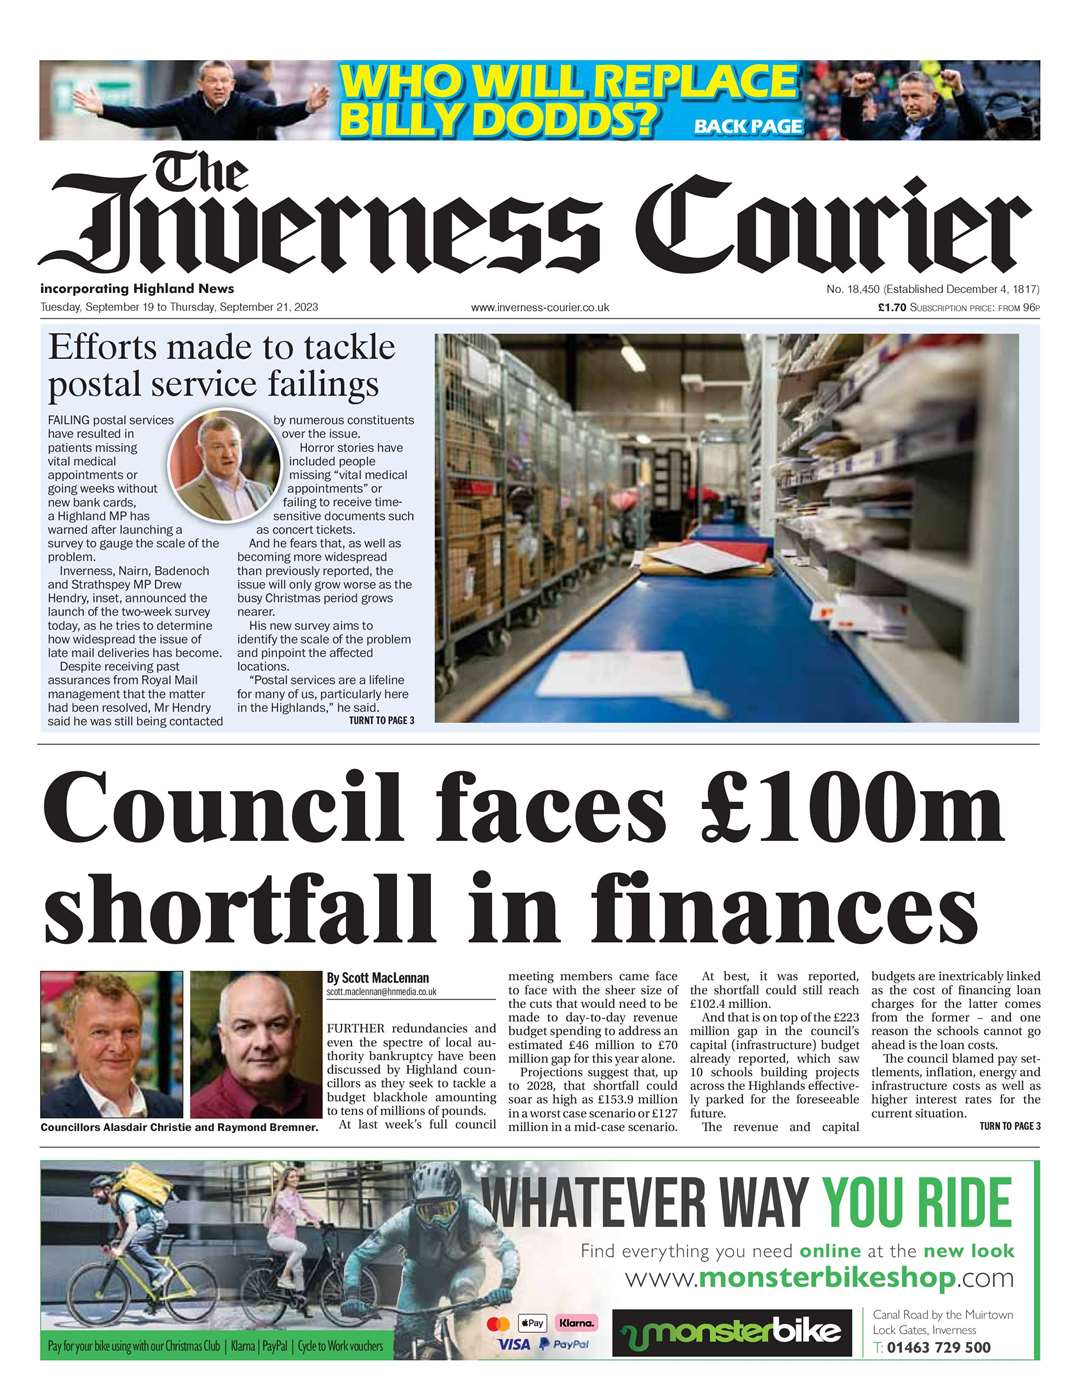 The Inverness Courier, September 19, front page.